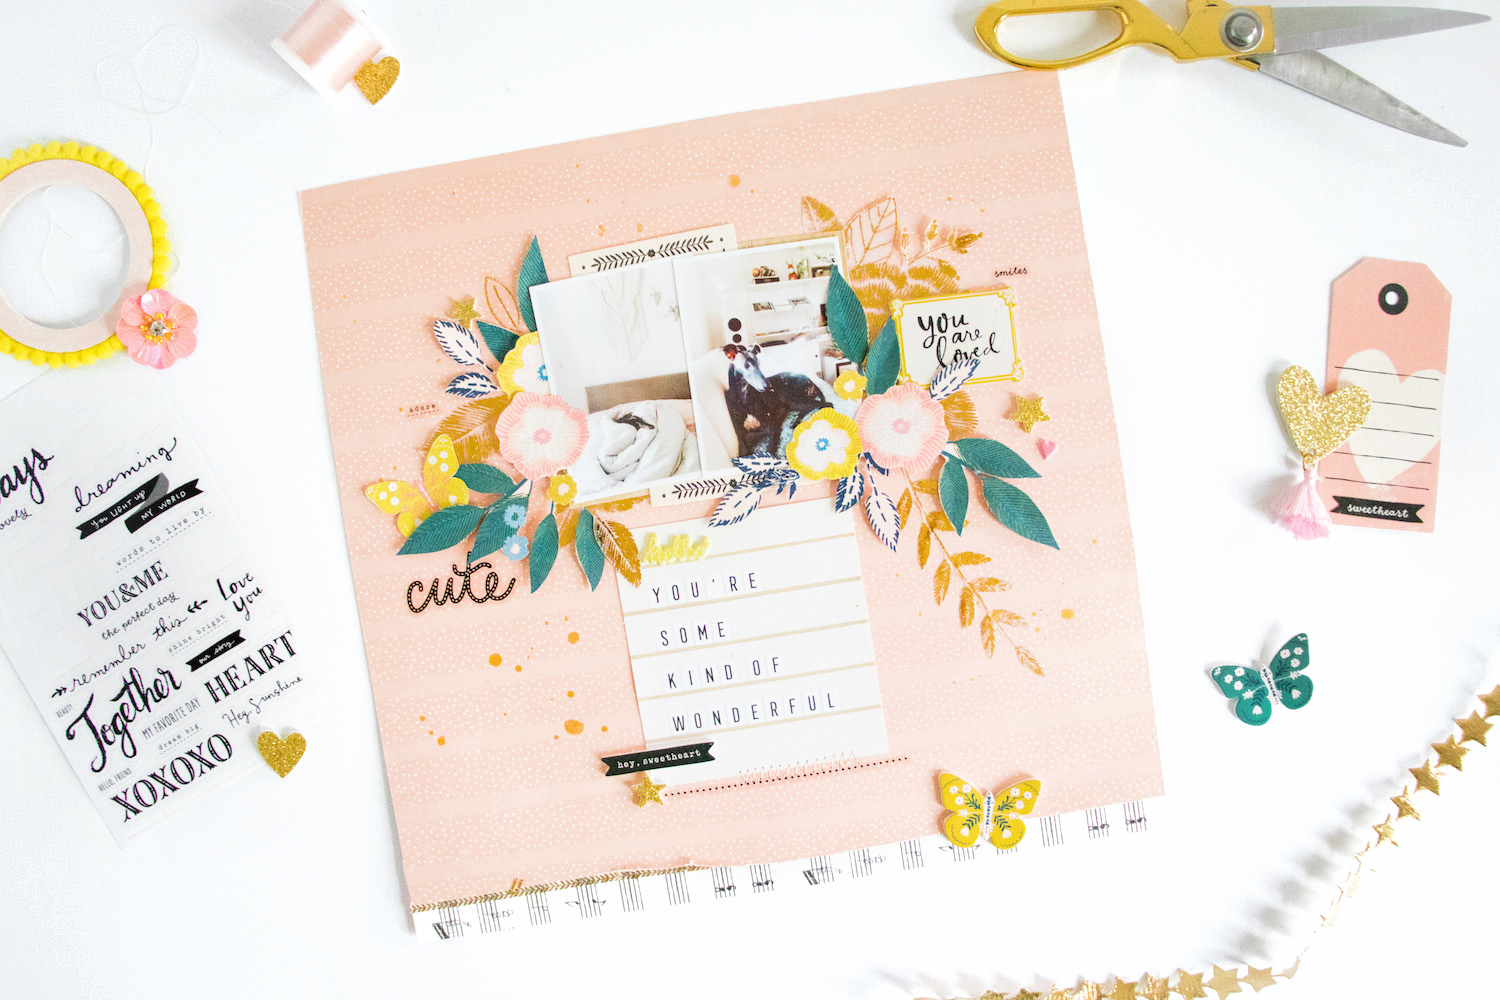 How to Make DIY Scrapbooking Layouts Friends Pretty Layered Flowers Maggie Holmes Design